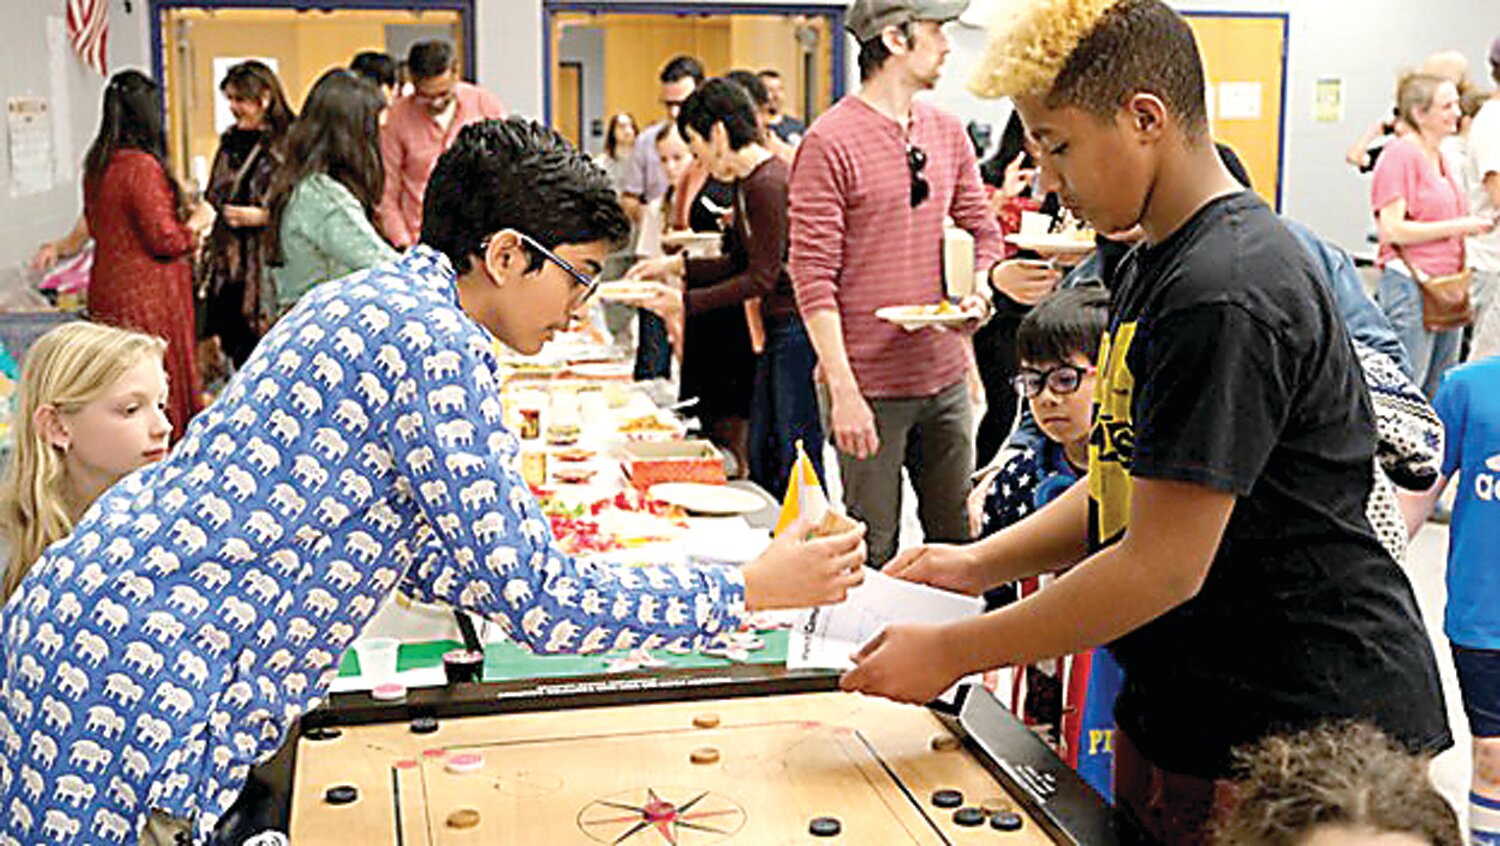 New Hope-Solebury student Mohneesh Vinukollu demonstrates how to play Carrom and helps fill in a passport book for fellow student Ethan Tumminello.